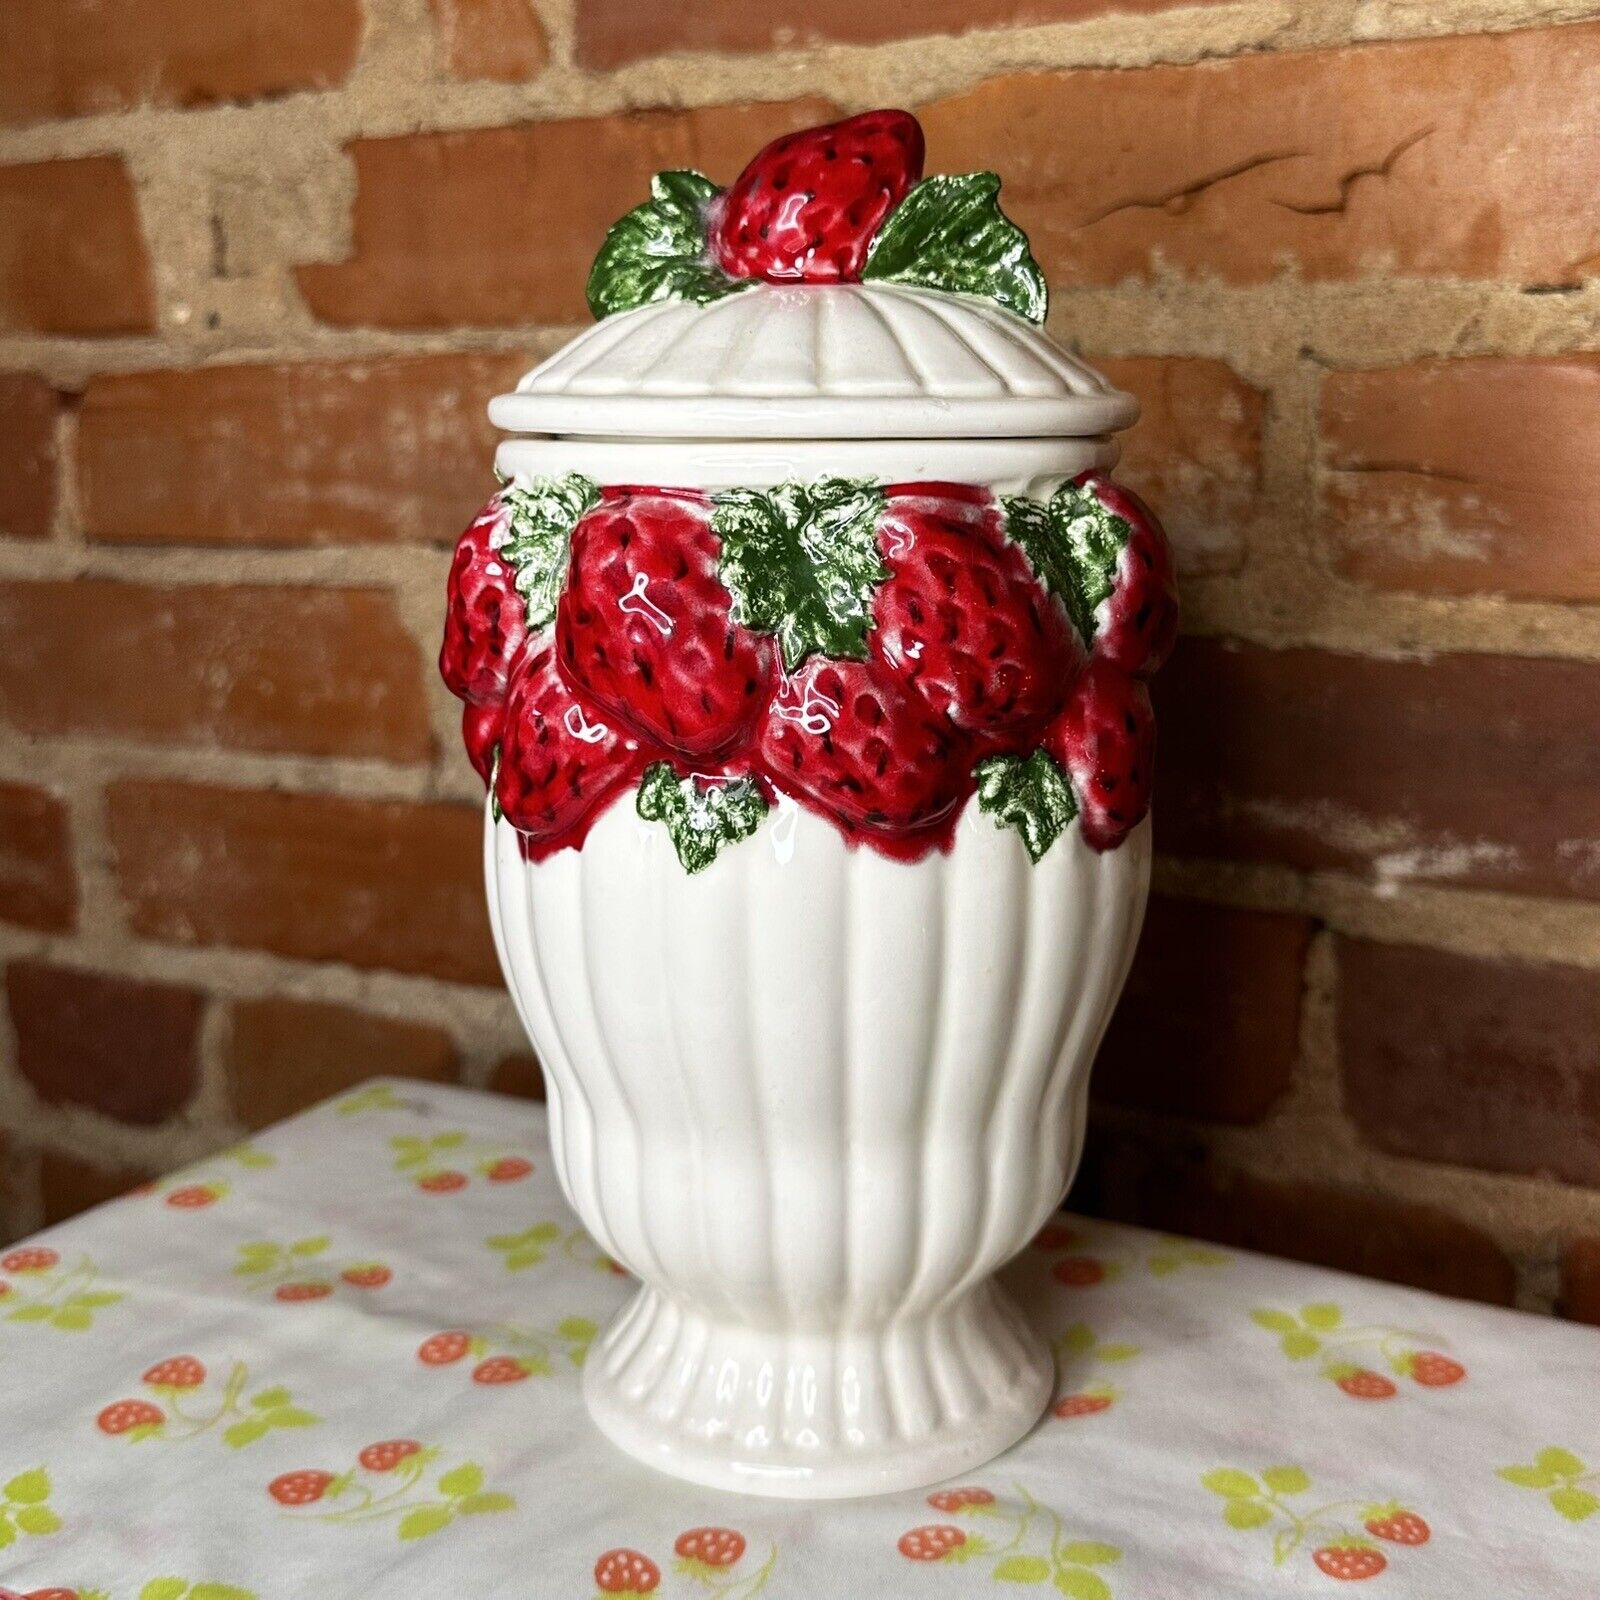 Vintage Strawberry Container Canister Unbranded Ceramic Decor Summer